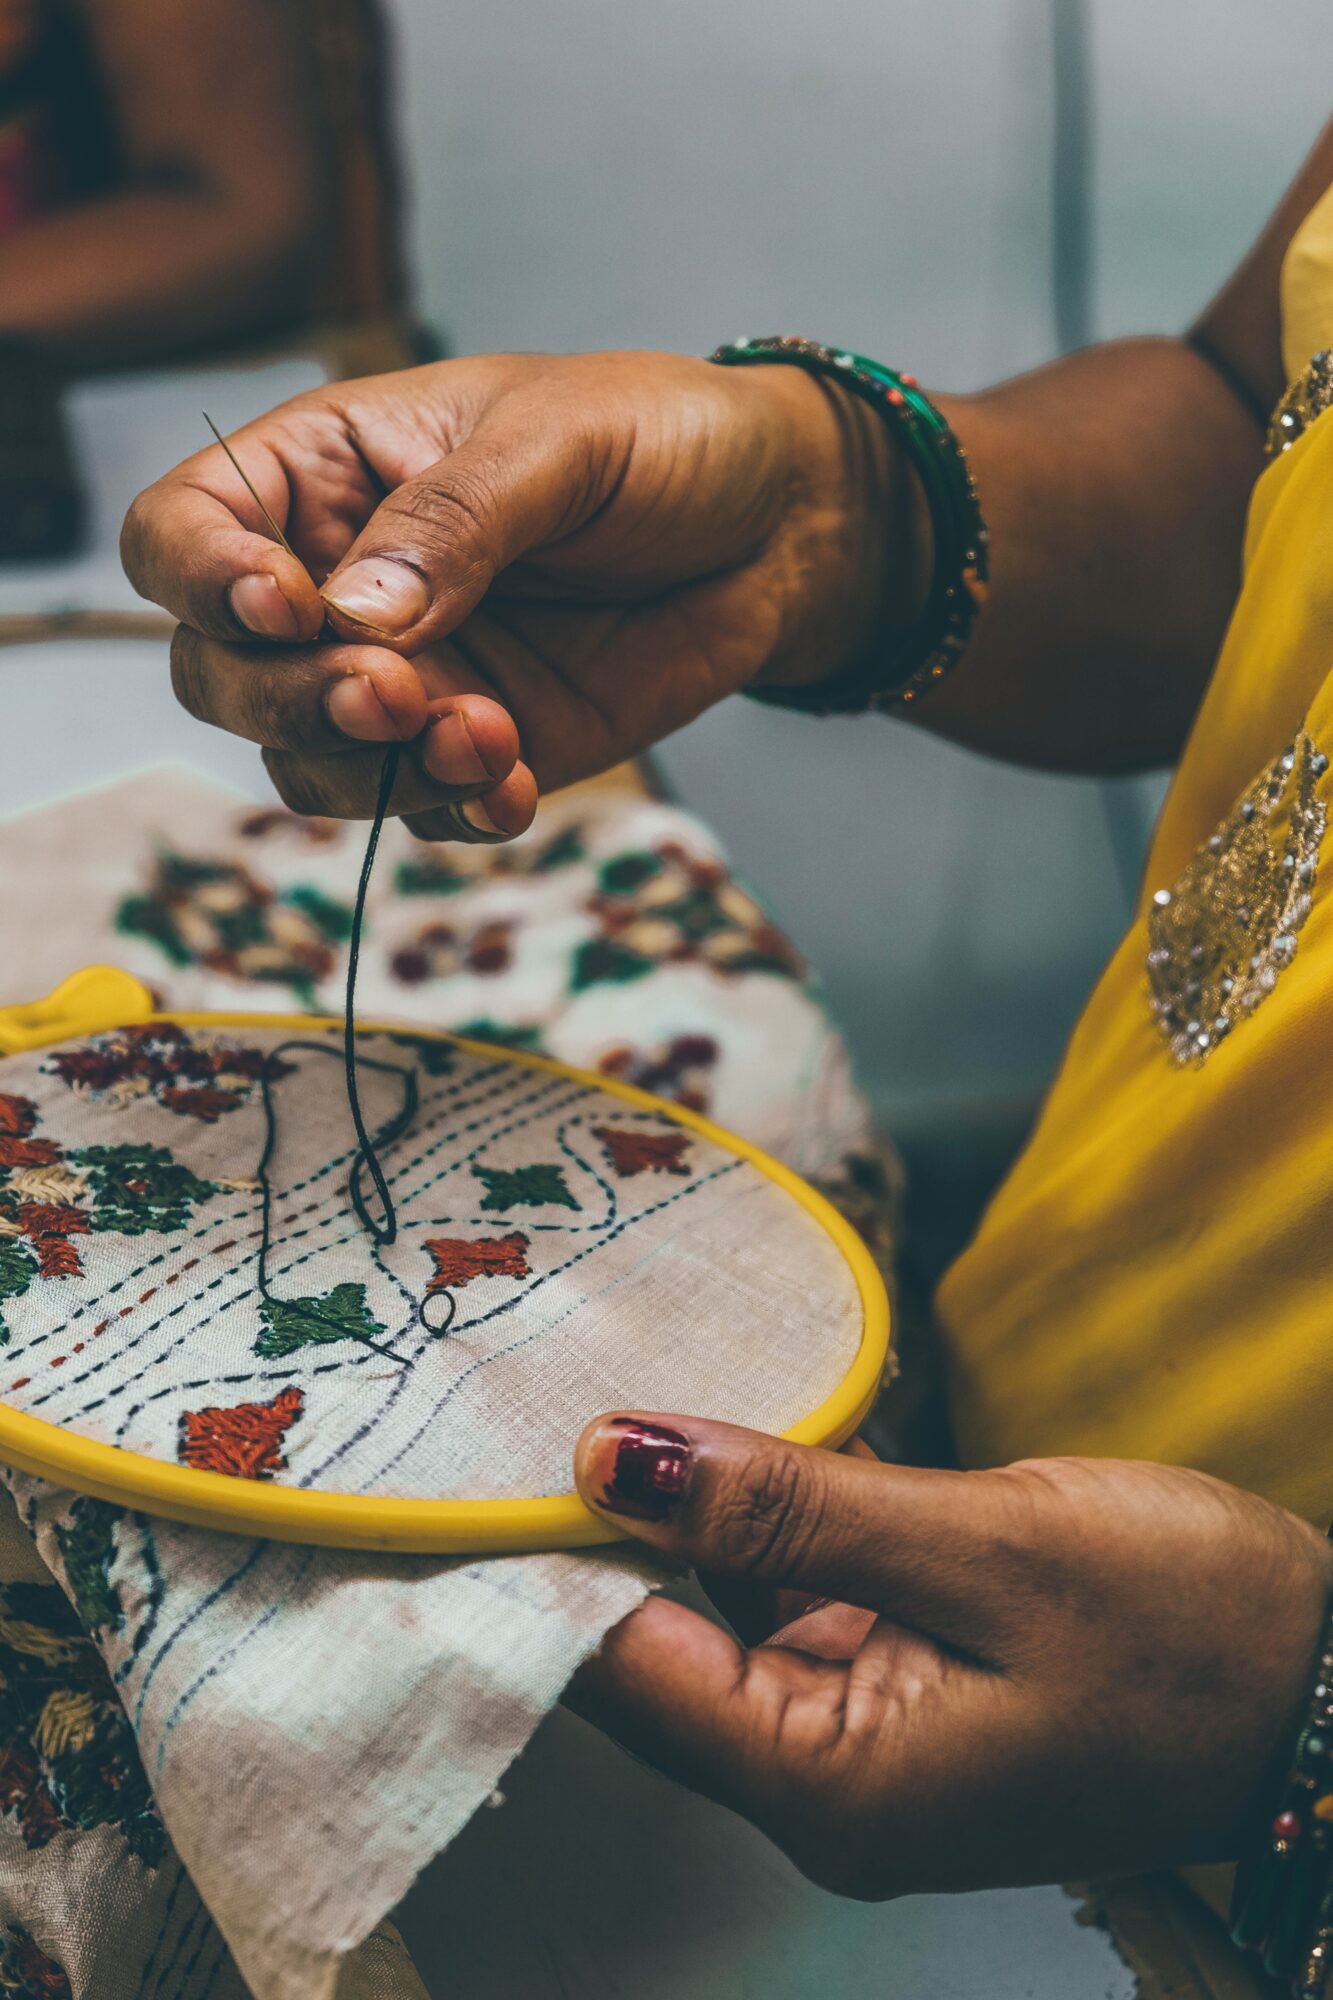 A woman's hands holding a needle and thread for hand embroidery